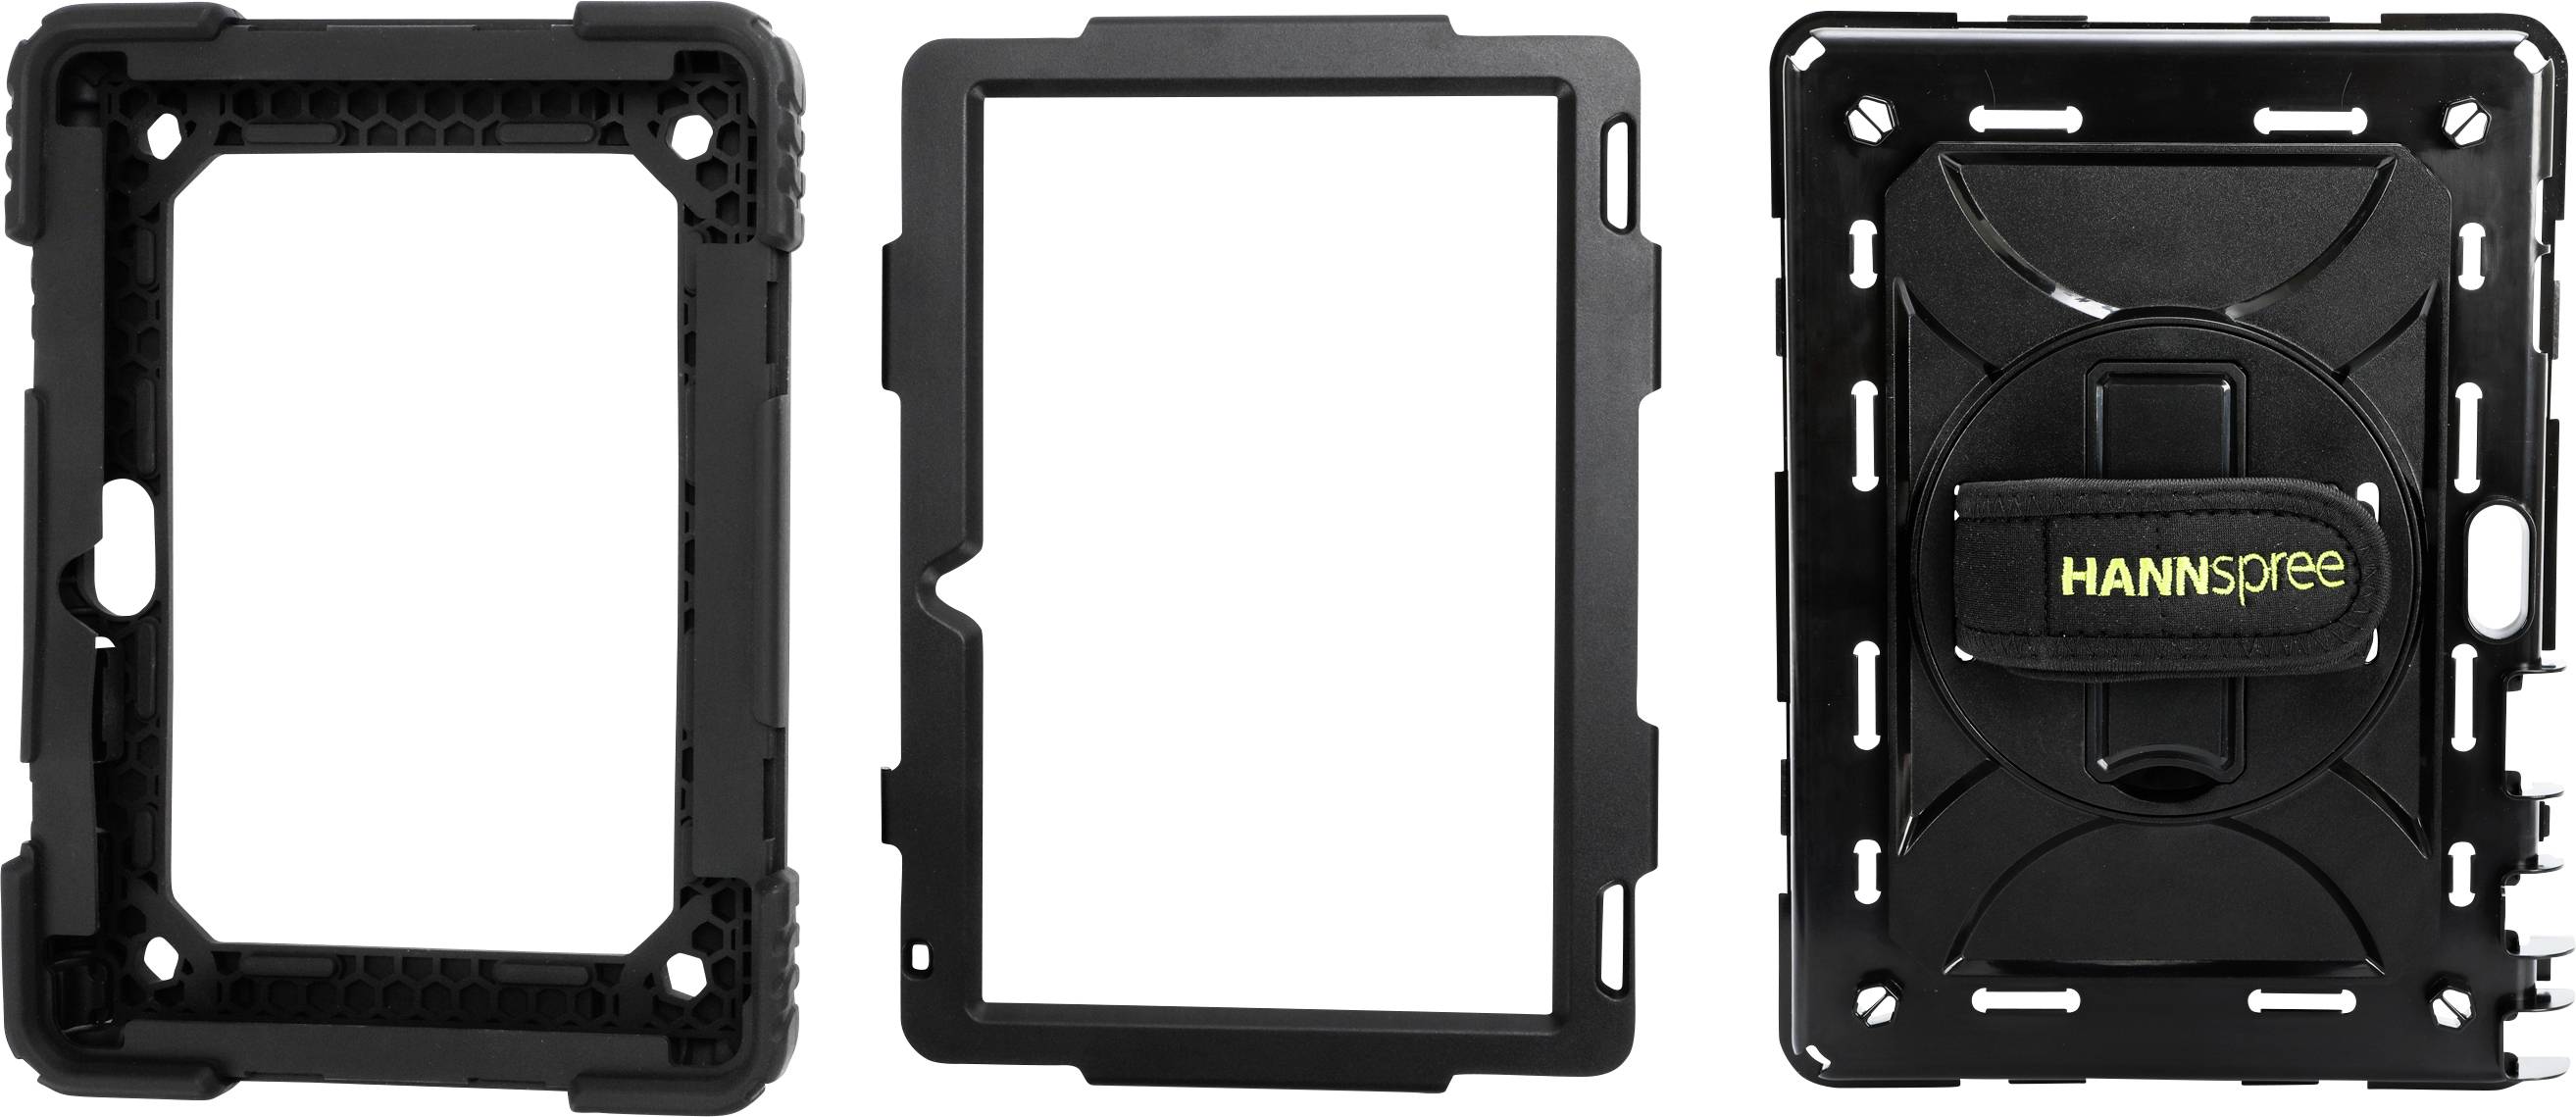 HANNSPREE Rugged Tablet Protection 10.1